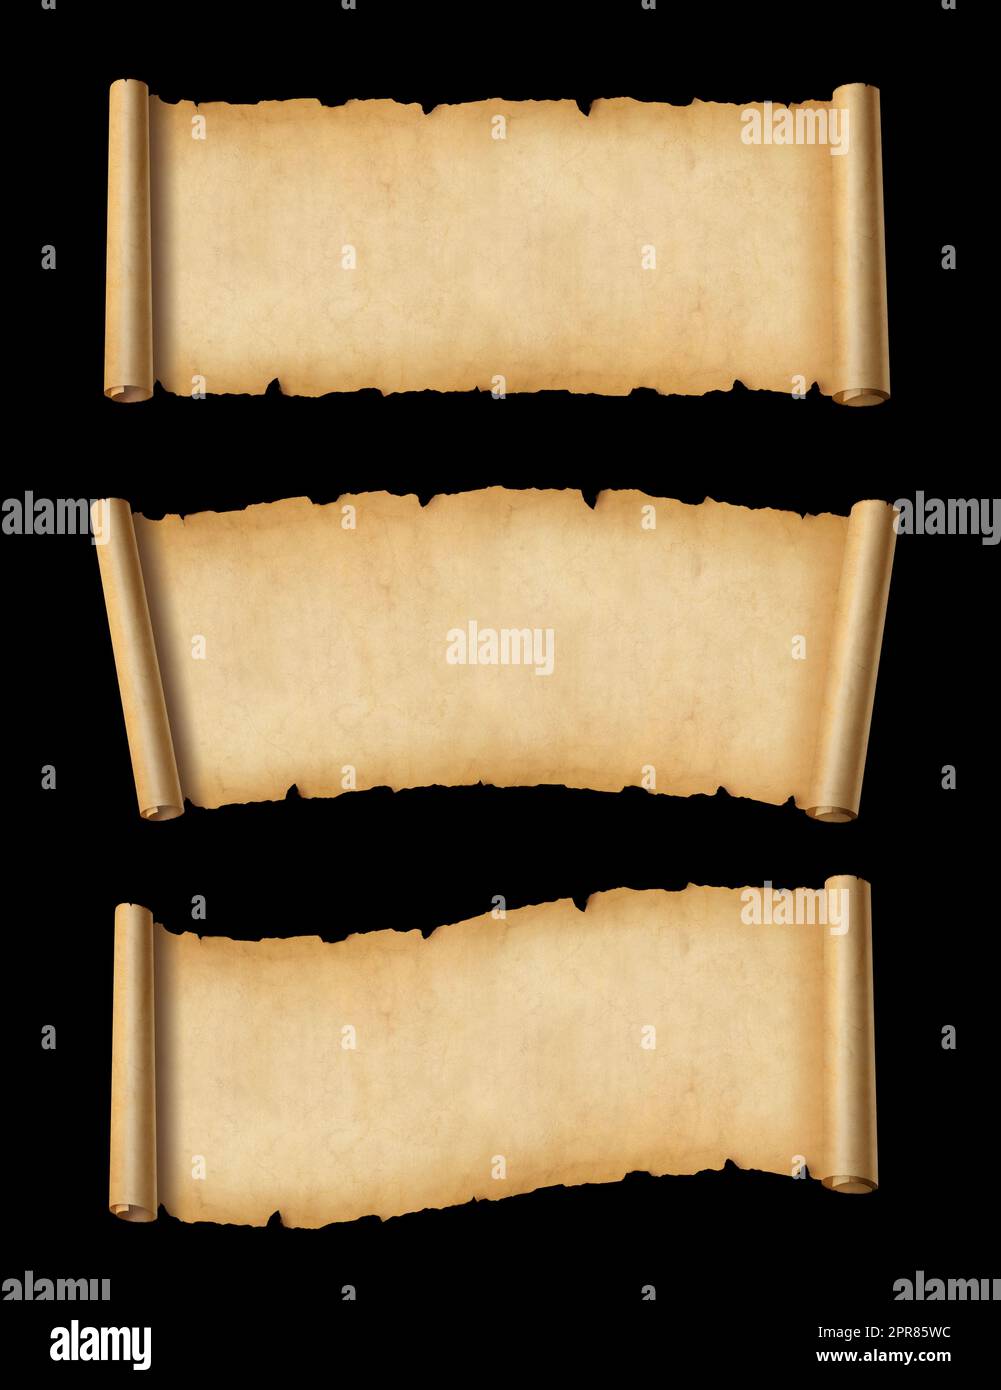 Old Parchment paper scroll set isolated on black. Horizontal banners Stock Photo